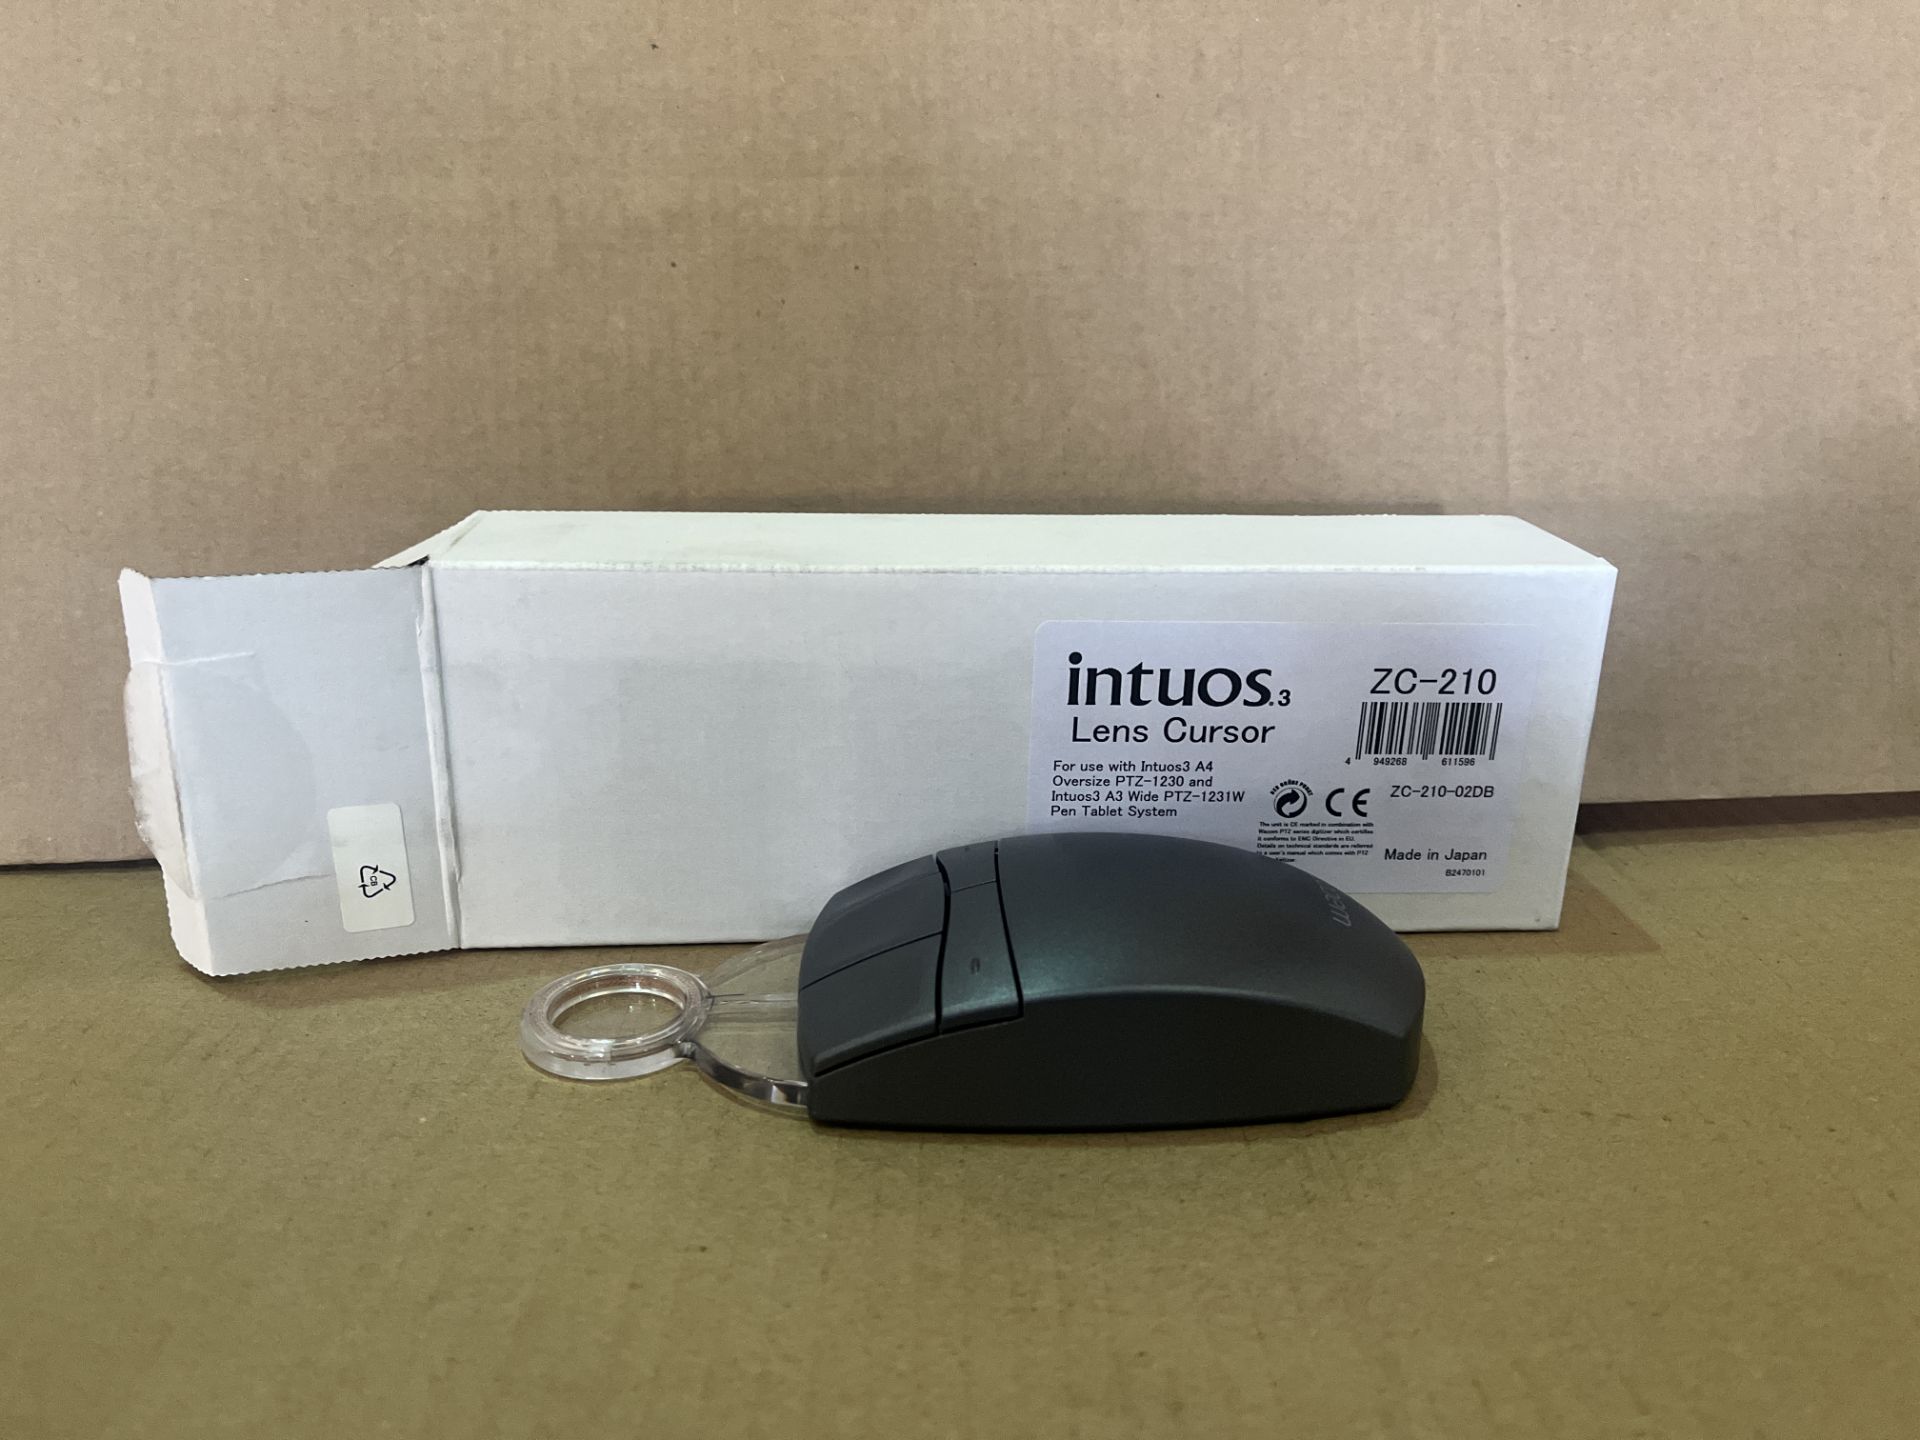 16 X BRAND NEW GENUINE WACUM INTUOS3 LENS CURSOR WIRELESS 5 BUTTON SCROLL MOUSE RRP £40 EACH R15